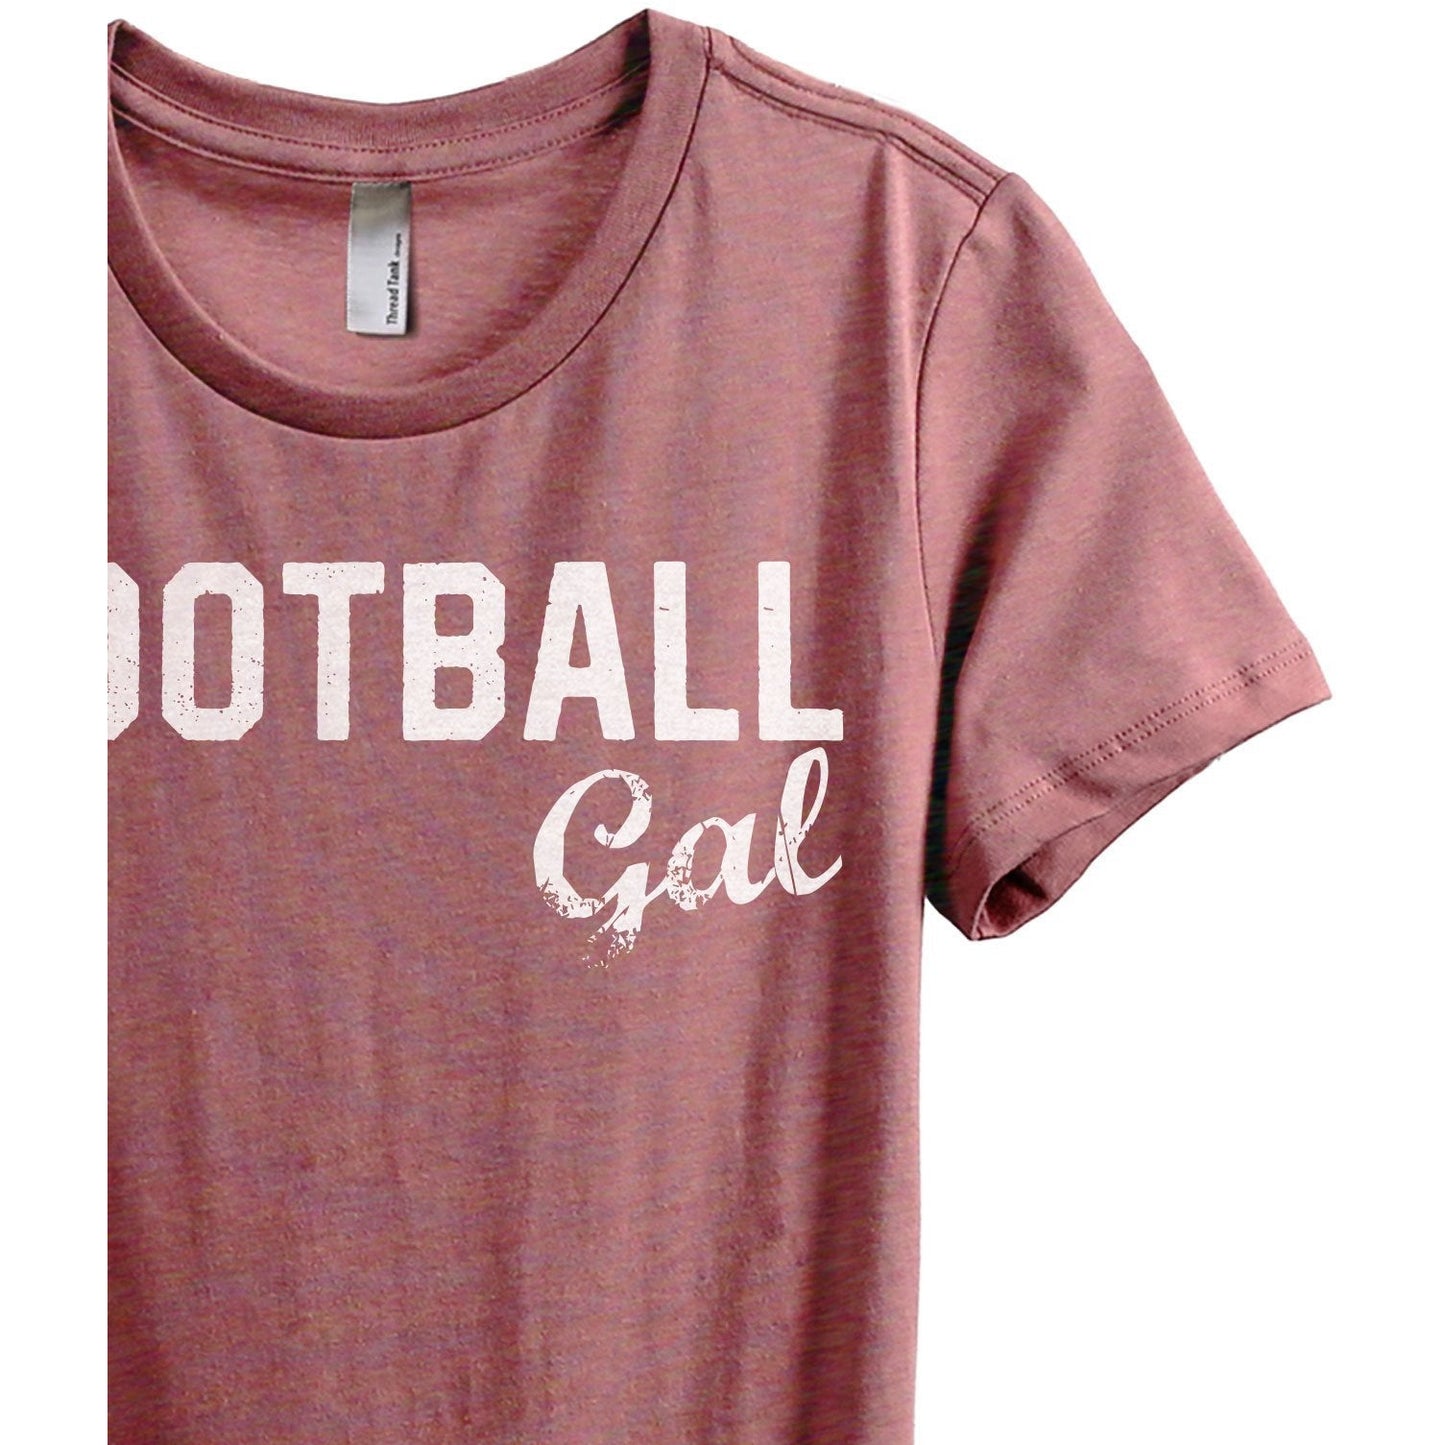 Football Gal Women's Relaxed Crewneck T-Shirt Top Tee Heather Rouge Zoom Details
